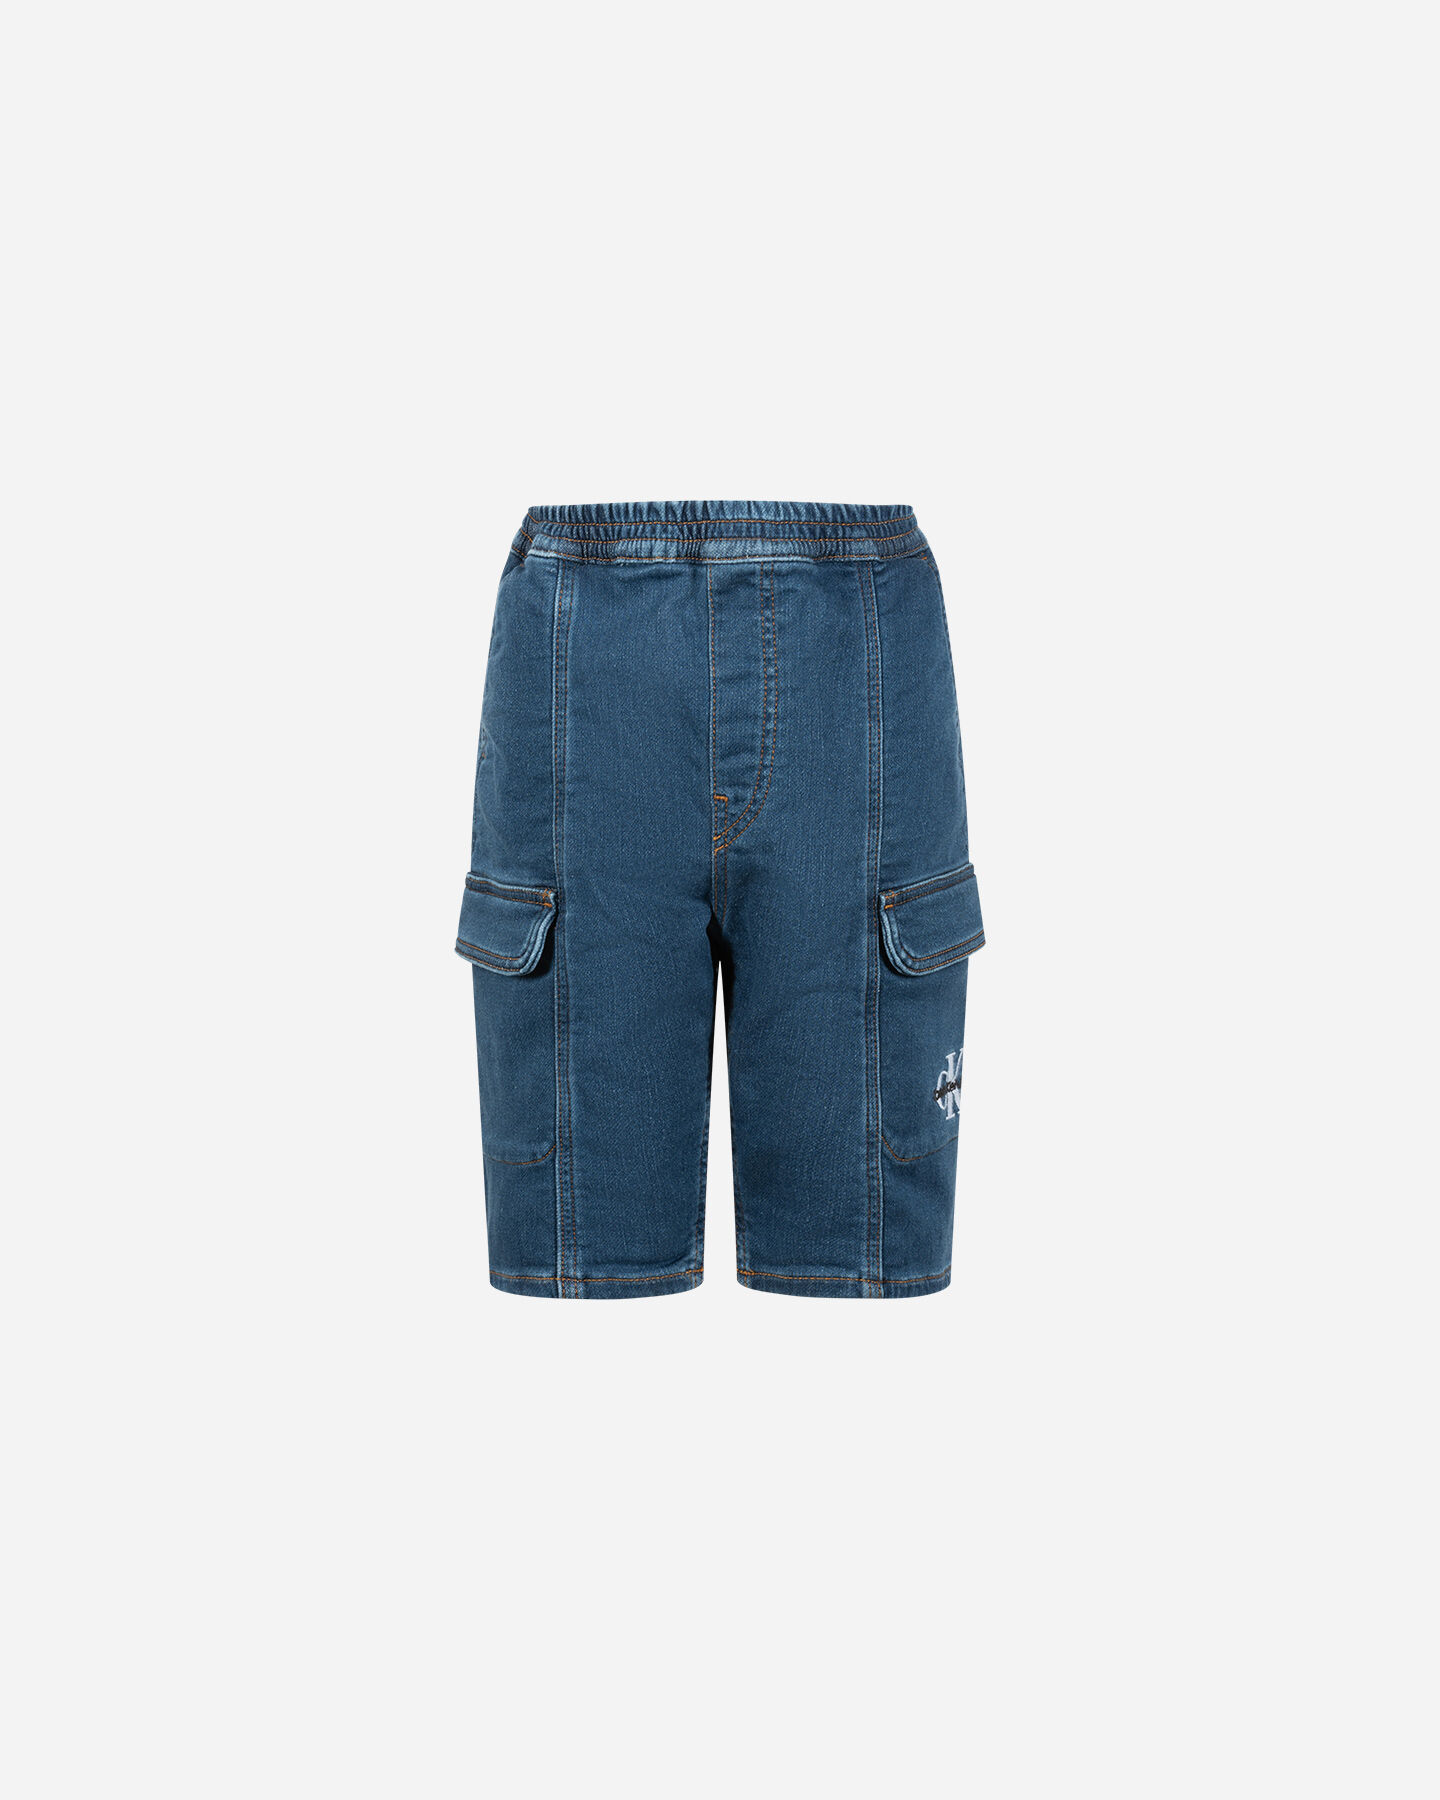  Pantalone CALVIN KLEIN JEANS DAD ICONIC JR S4131538|Iconic Mid|10 scatto 0